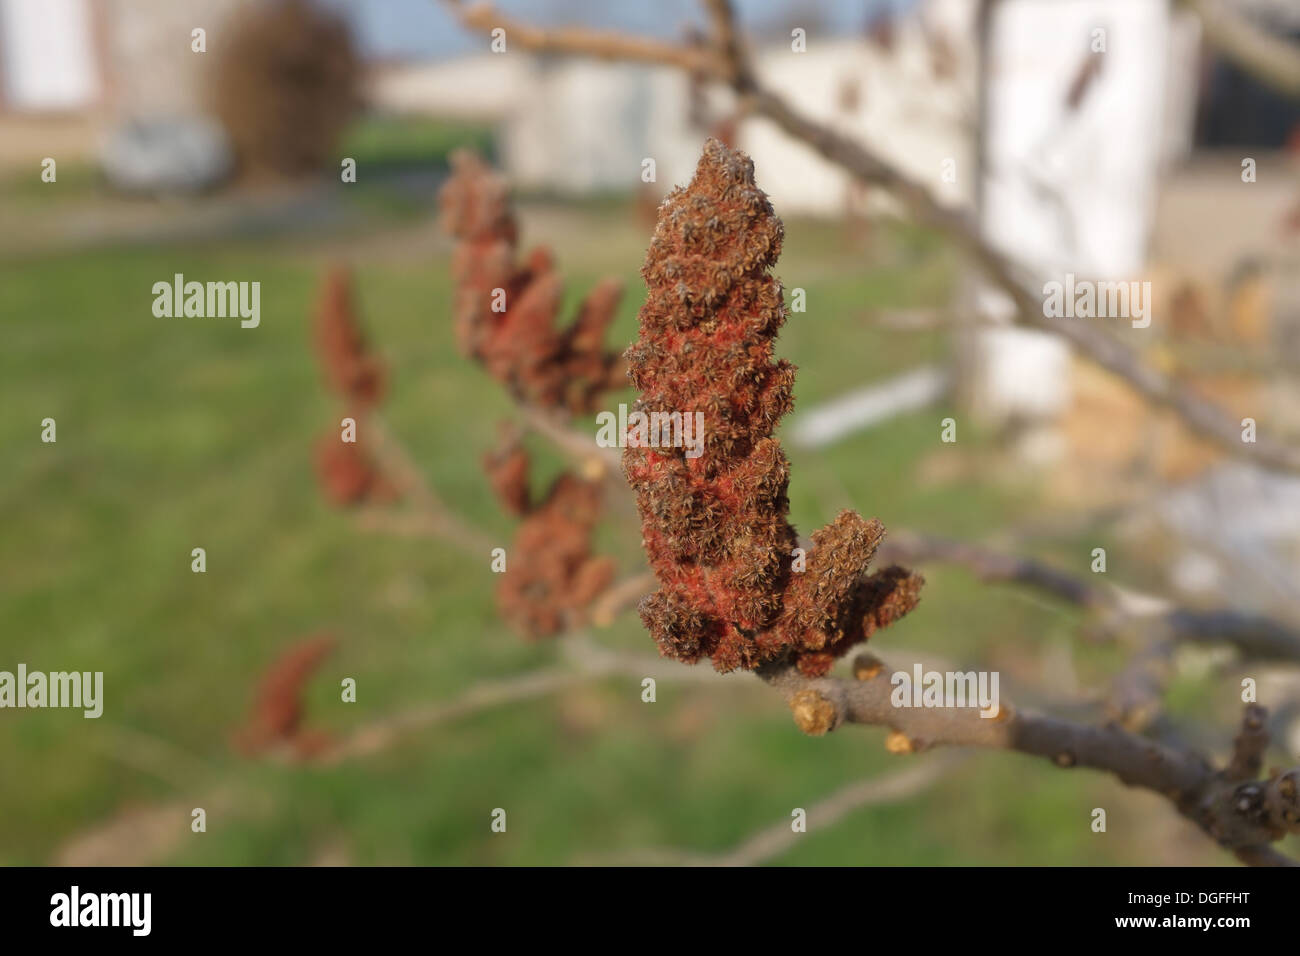 Fruit of Rhus typhina syn. R. hirta (staghorn sumac or stag's horn sumach) Stock Photo